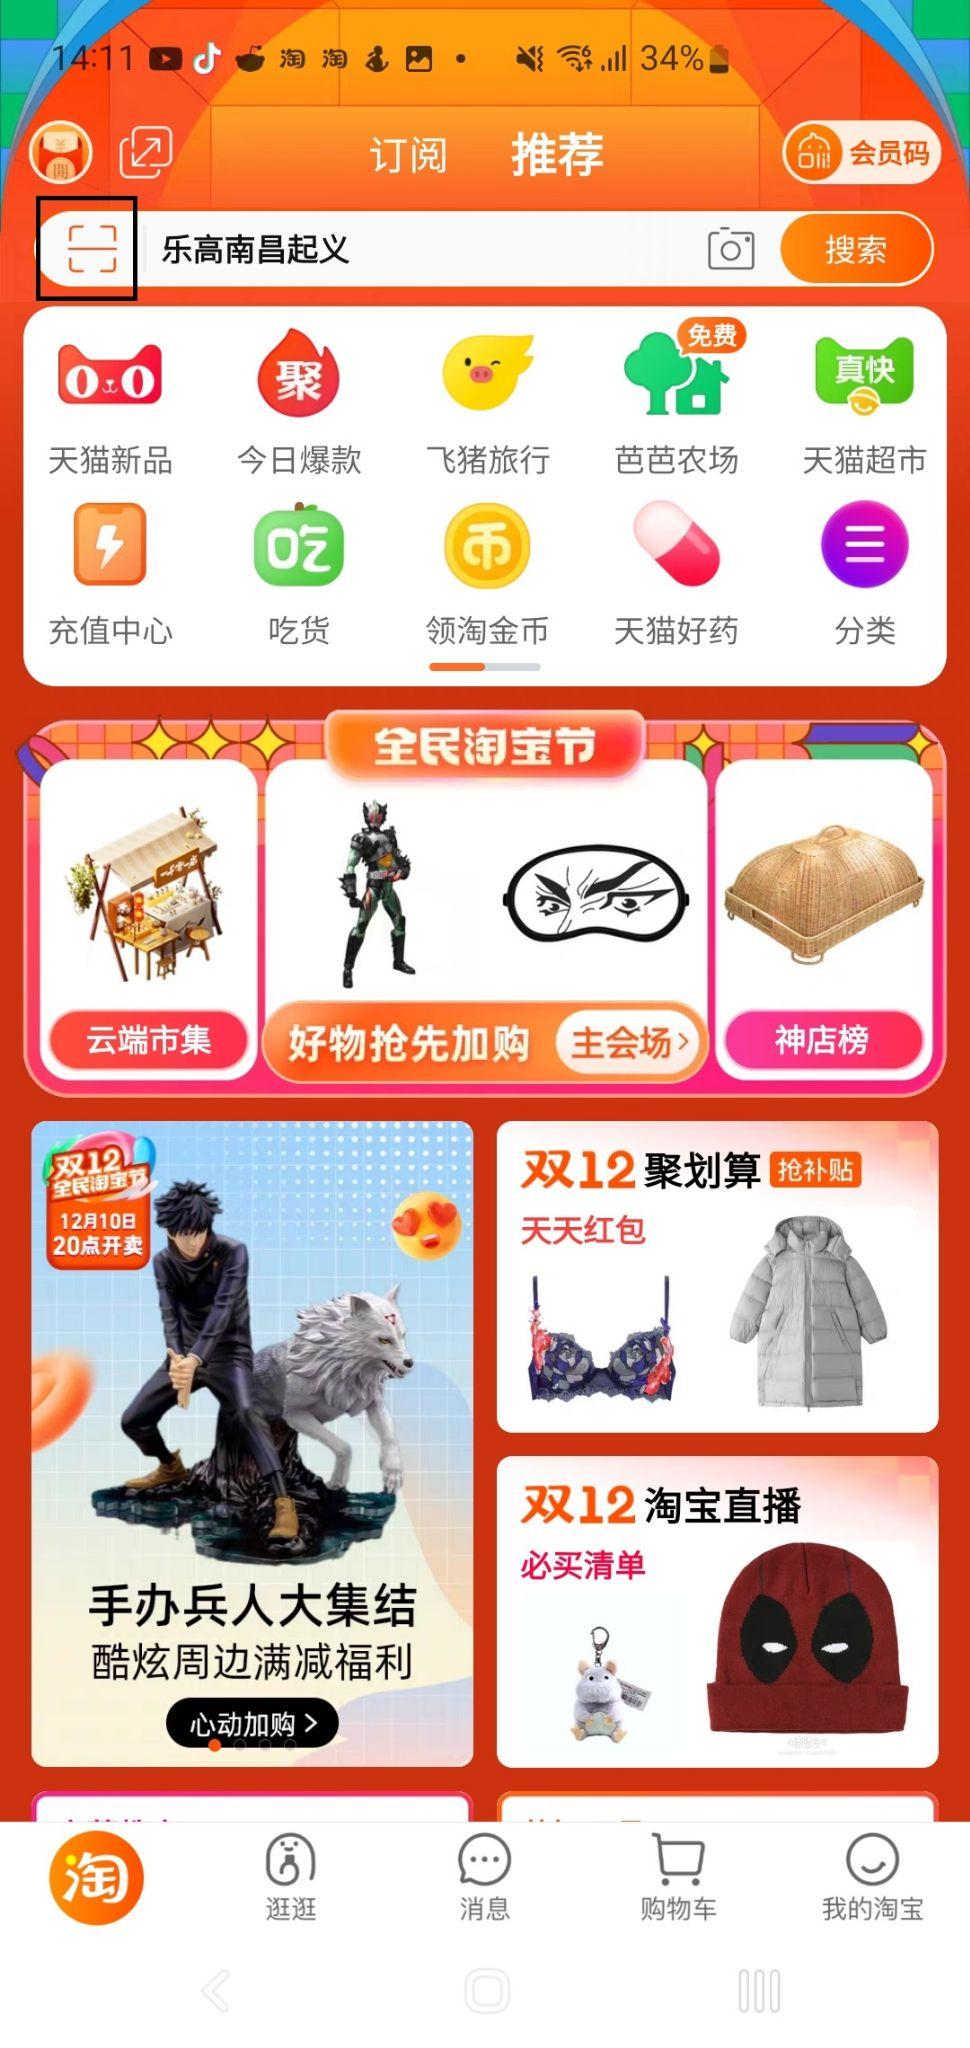 Complete daily tasks to collect Taobao coins